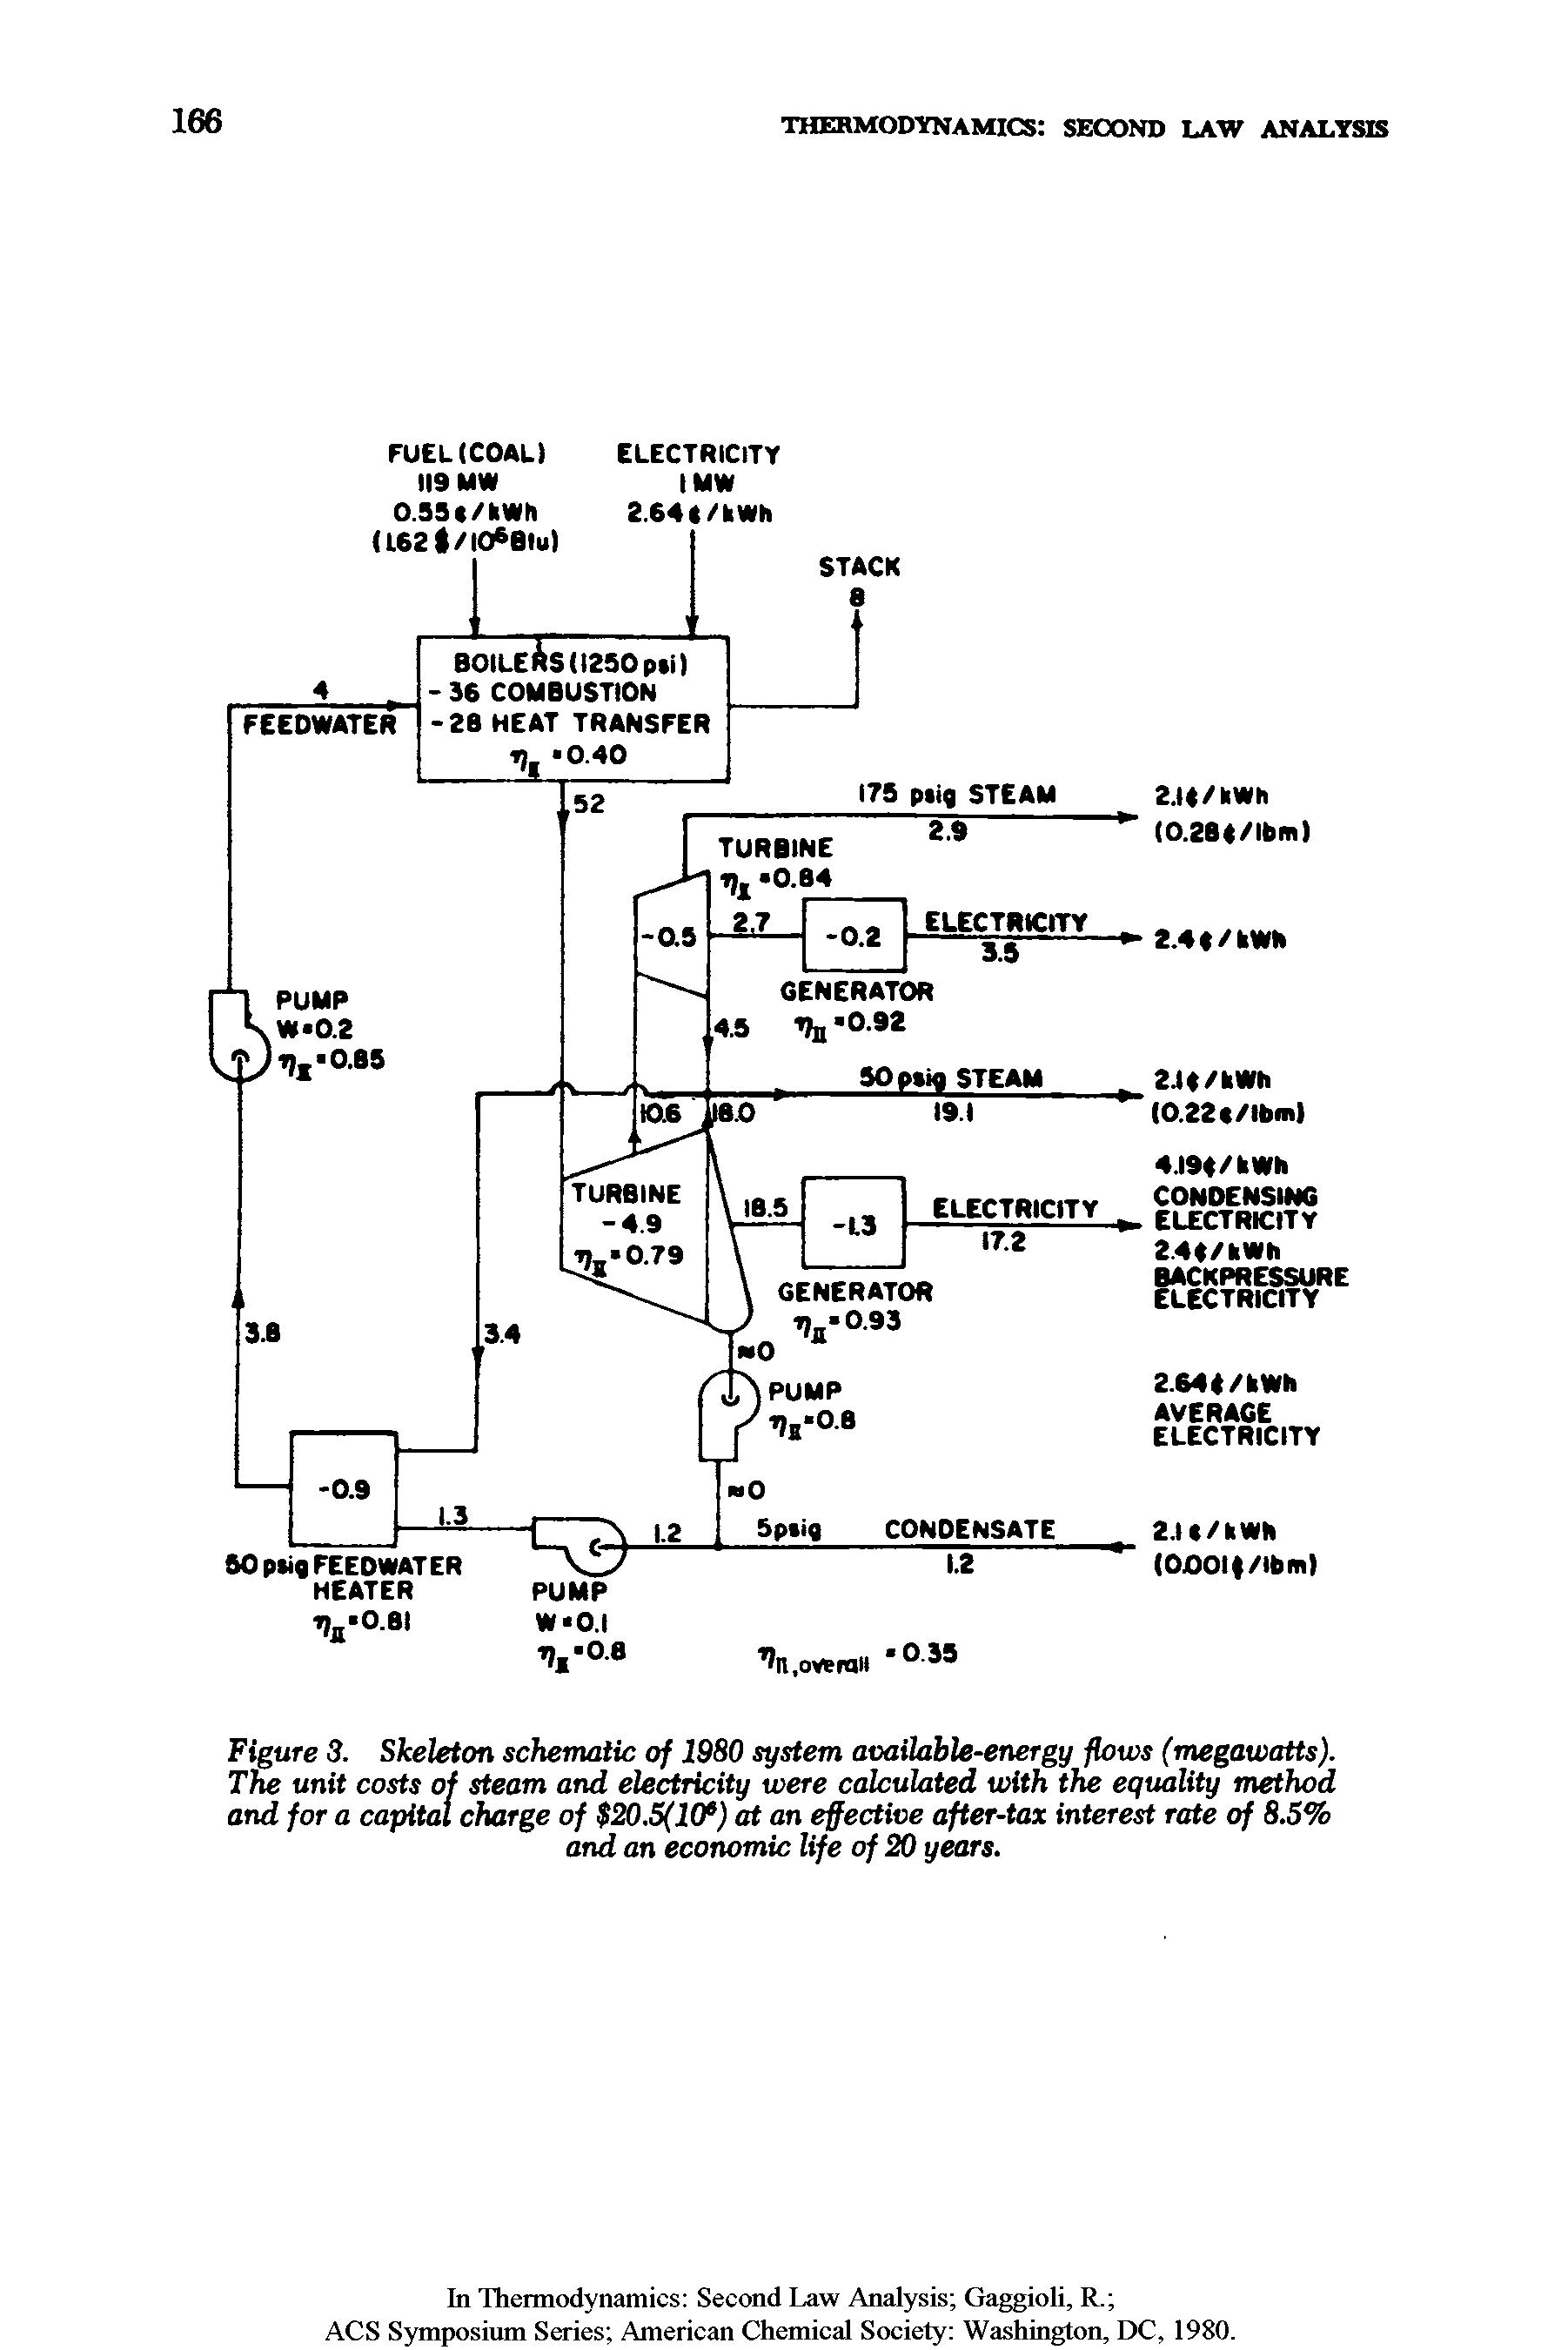 Figure 3. Skeleton schematic of 1980 system available-energy flows (megawatts). The unit costs of steam and electricity were calculated with the equality method and for a capital charge of 20.5(106) at an effective after-tax interest rate of 8.5% and an economic life of 20 years.